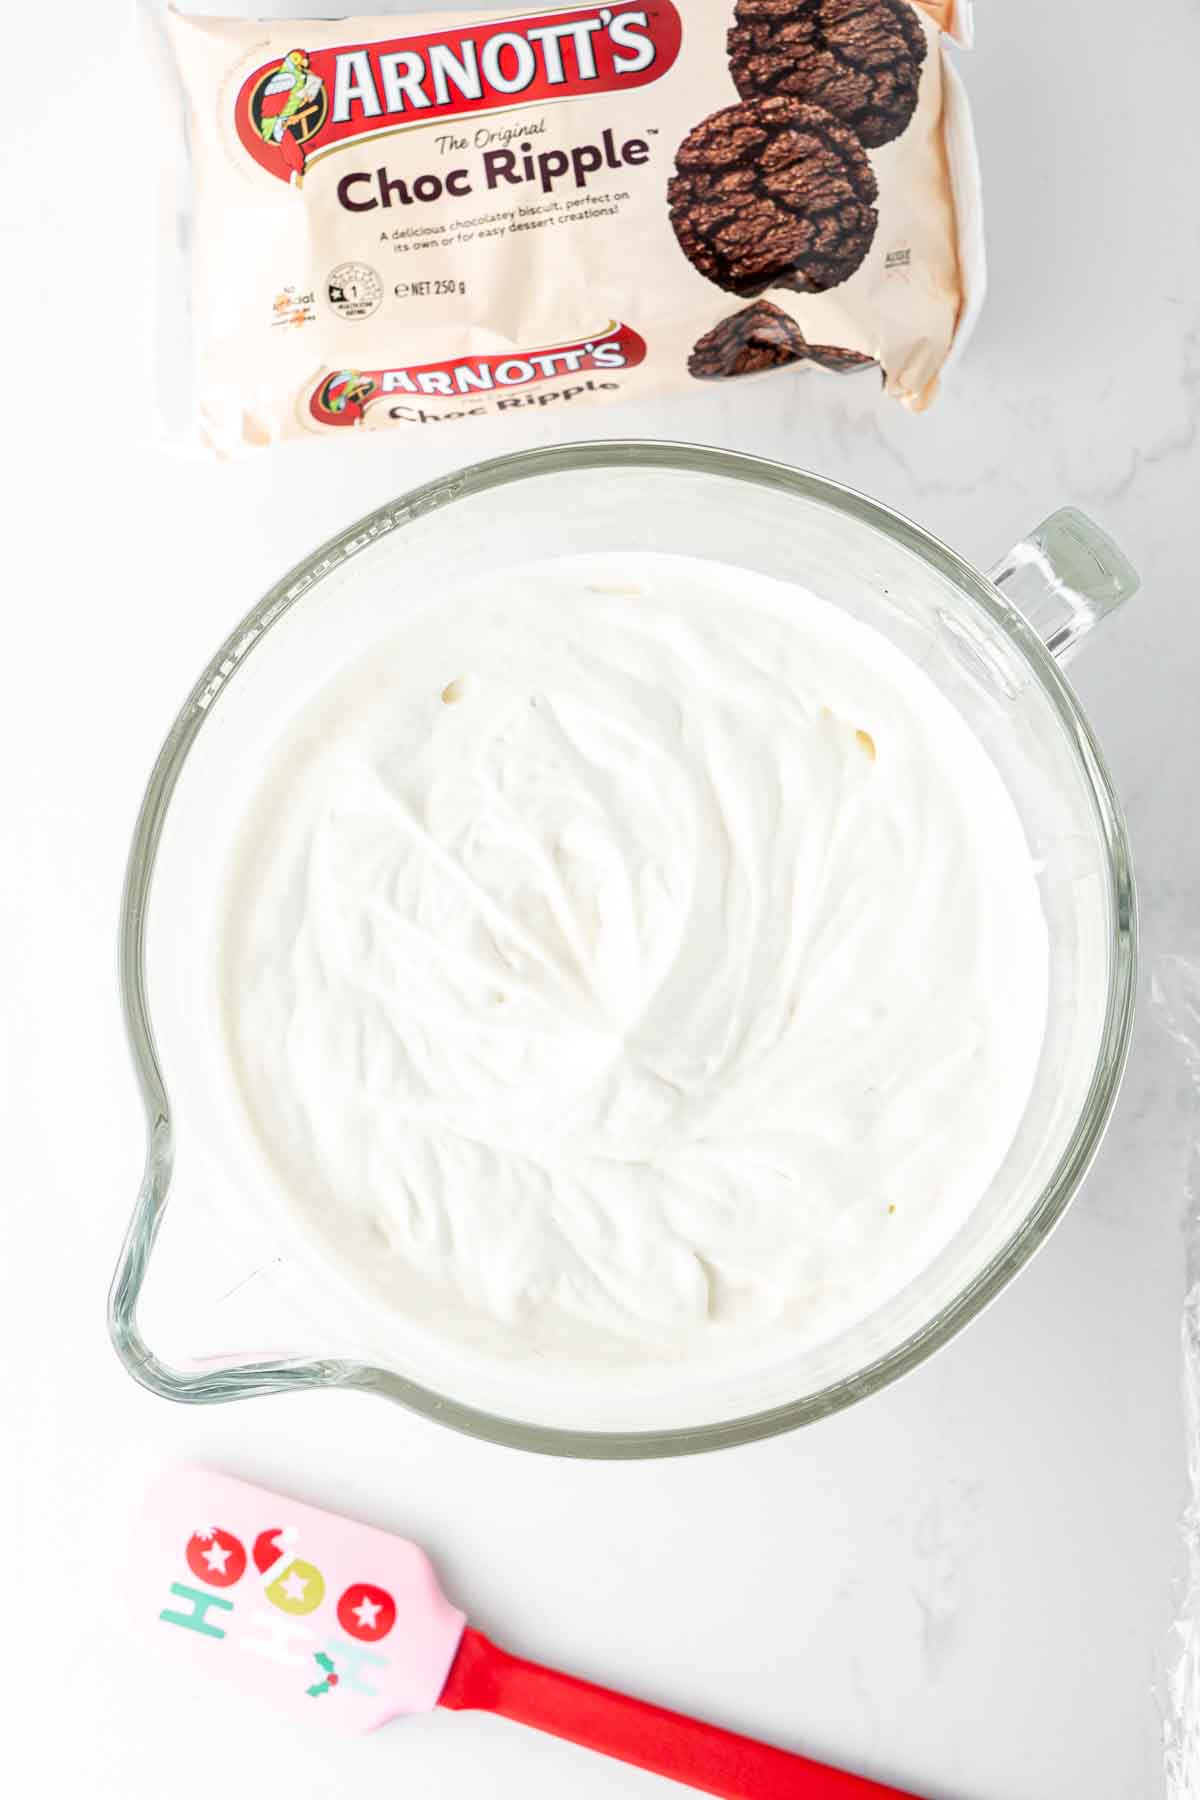 Whipped plant based cream in a mixing bowl.